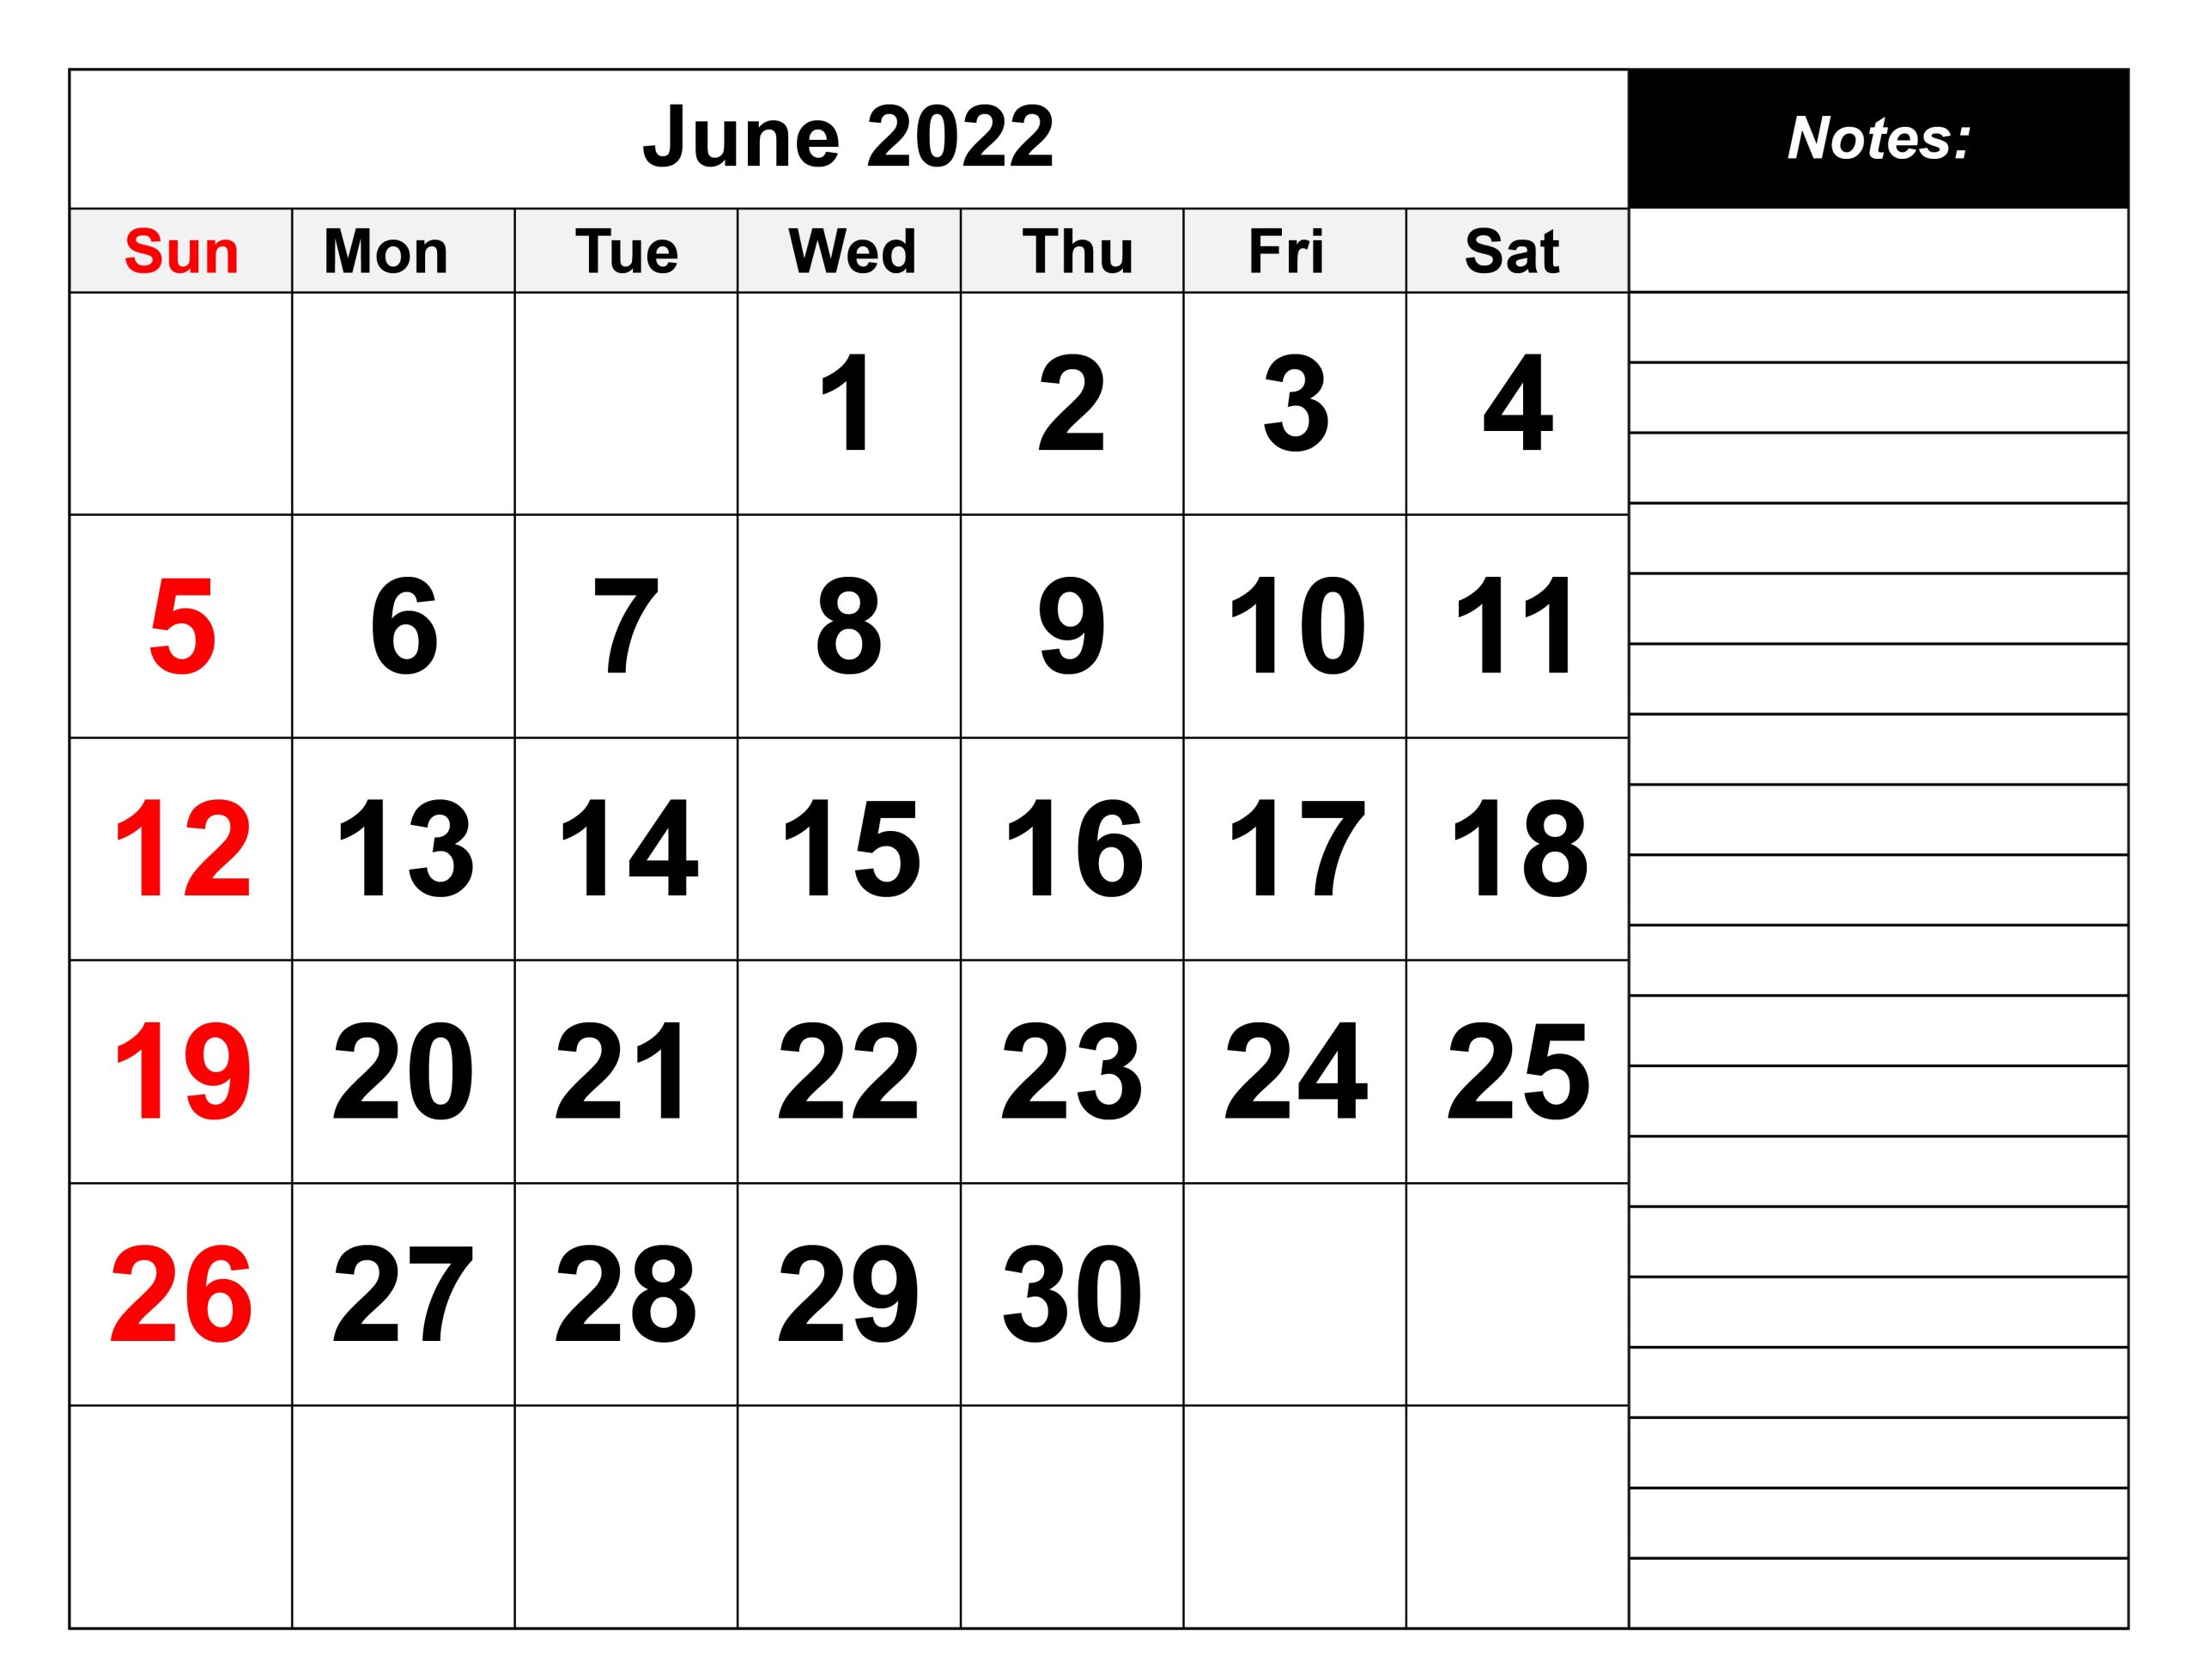 June Calendar 2022 With Notes